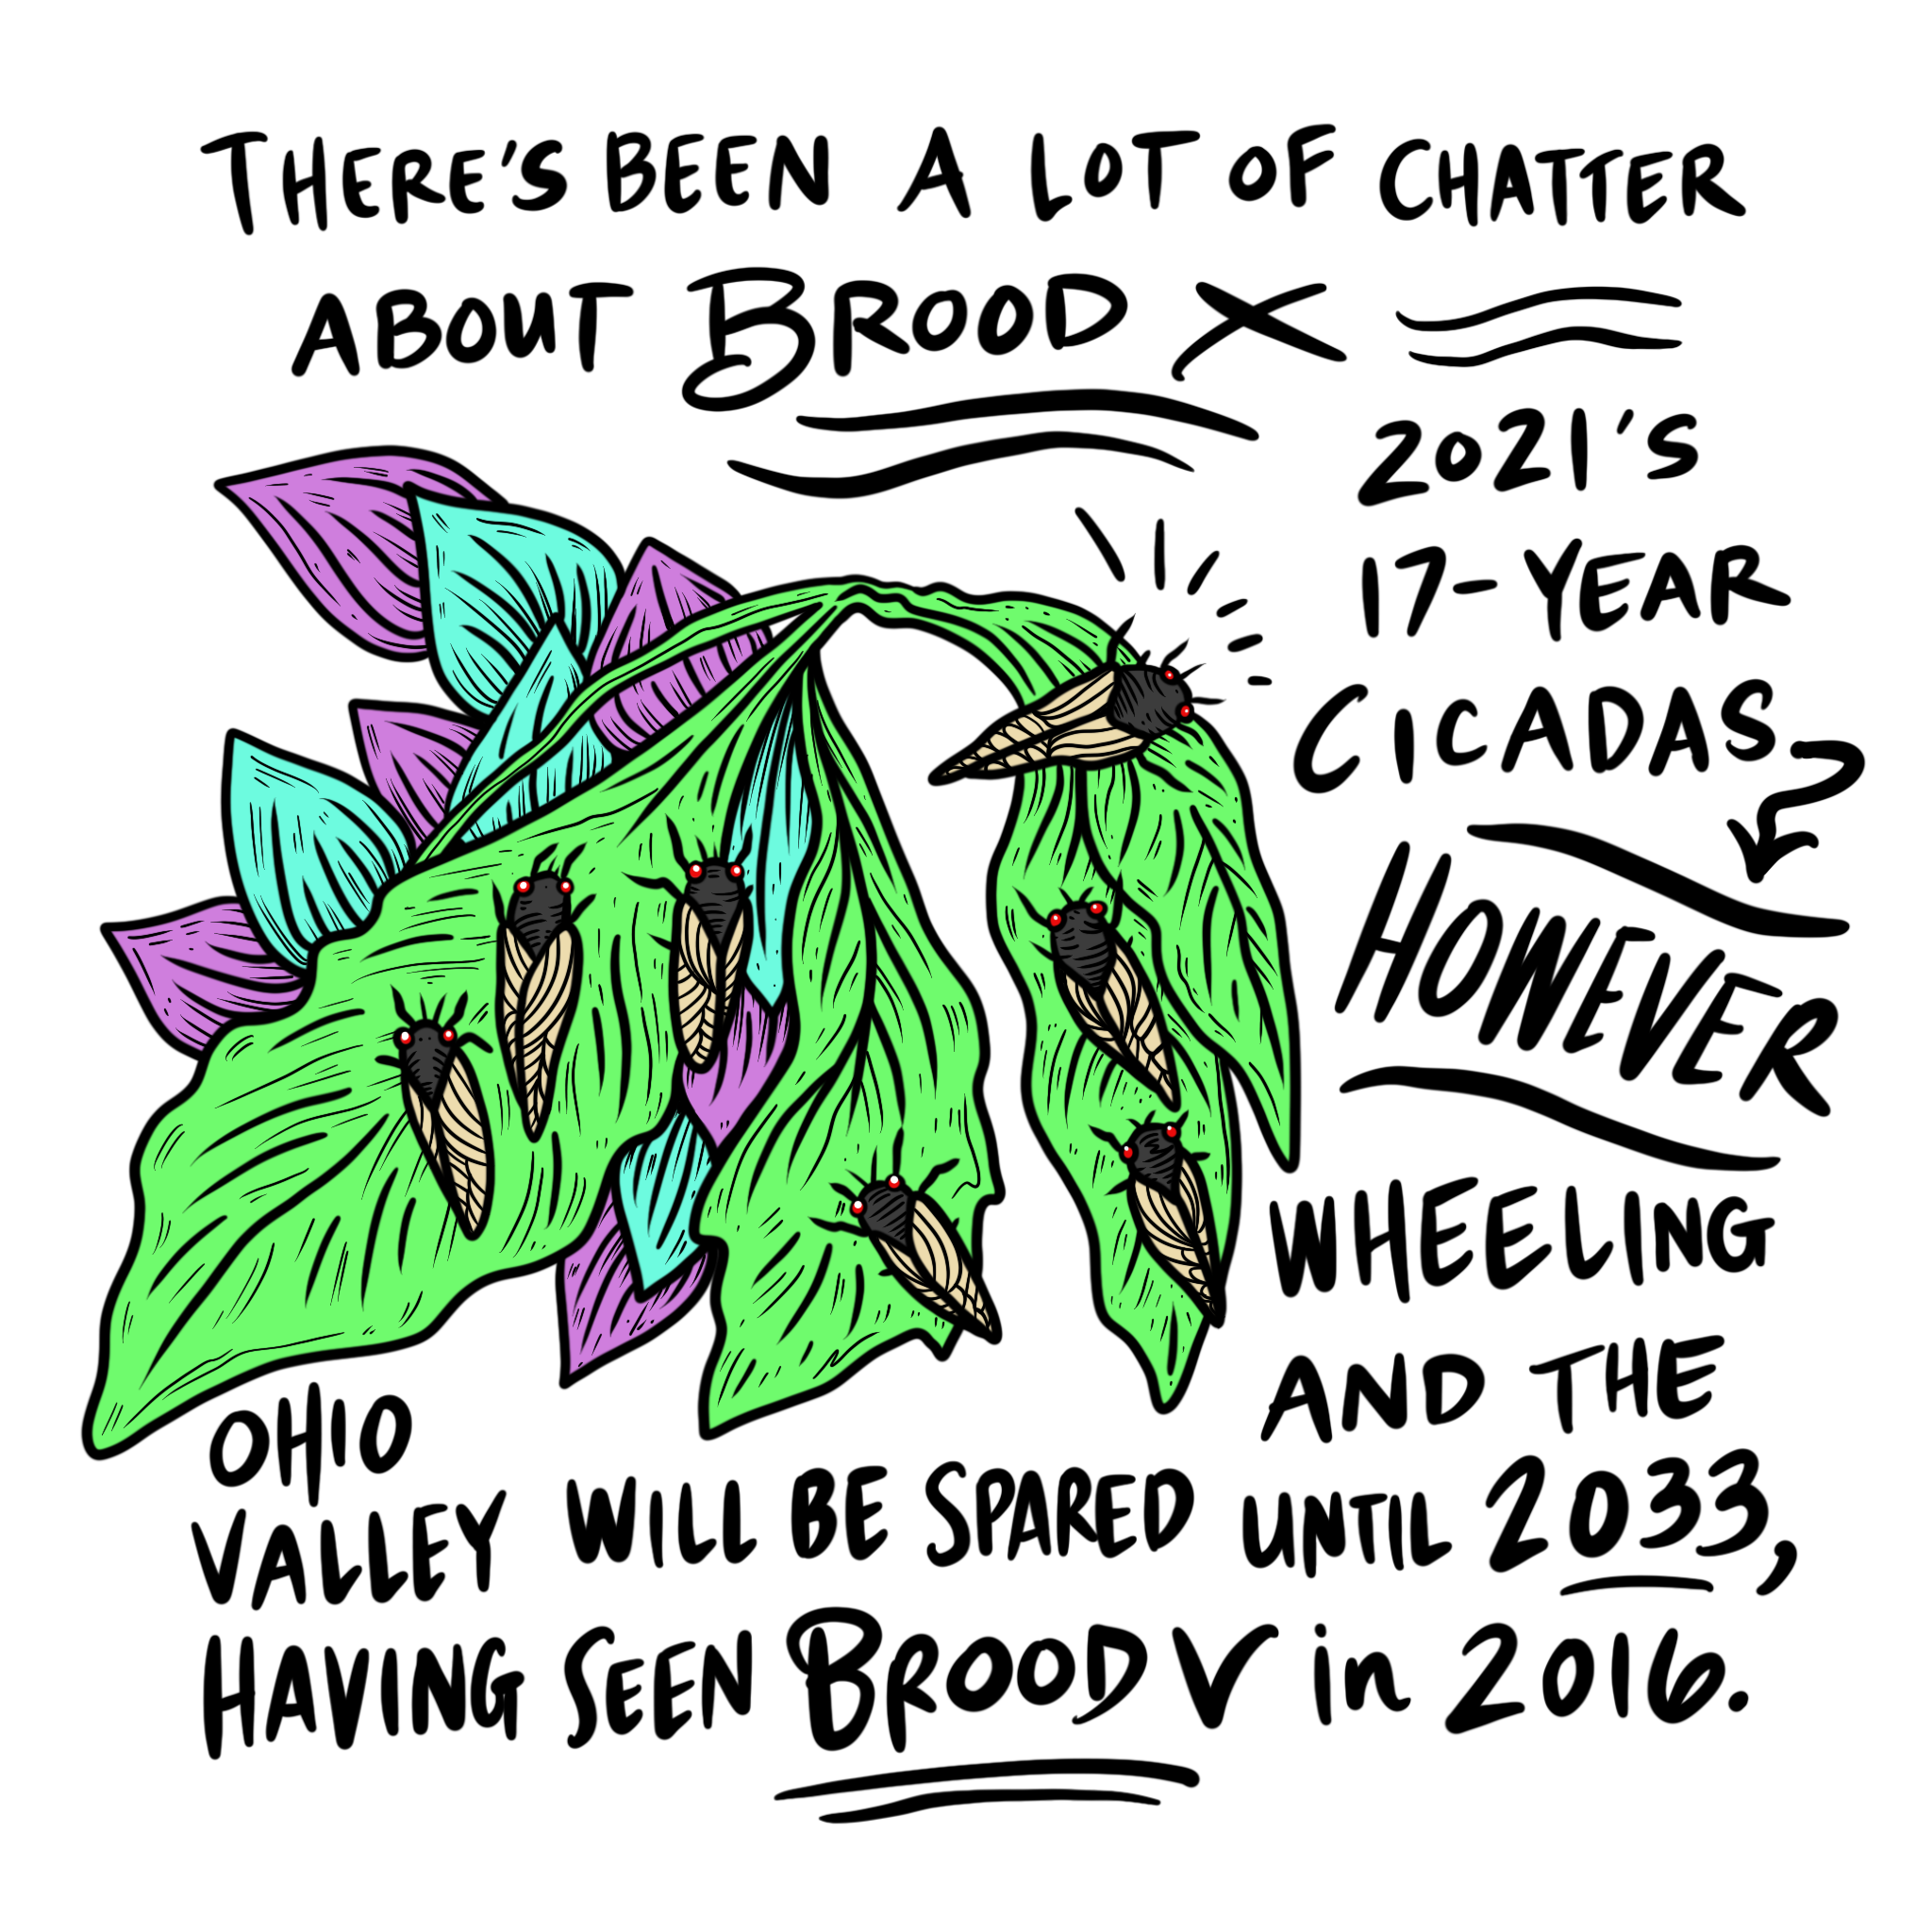 There’s been a lot of chatter about Brood X, 2021’s 17-year cicadas. However, Wheeling and the Ohio Valley will be spared until 2033, having seen Brood V in 2016.